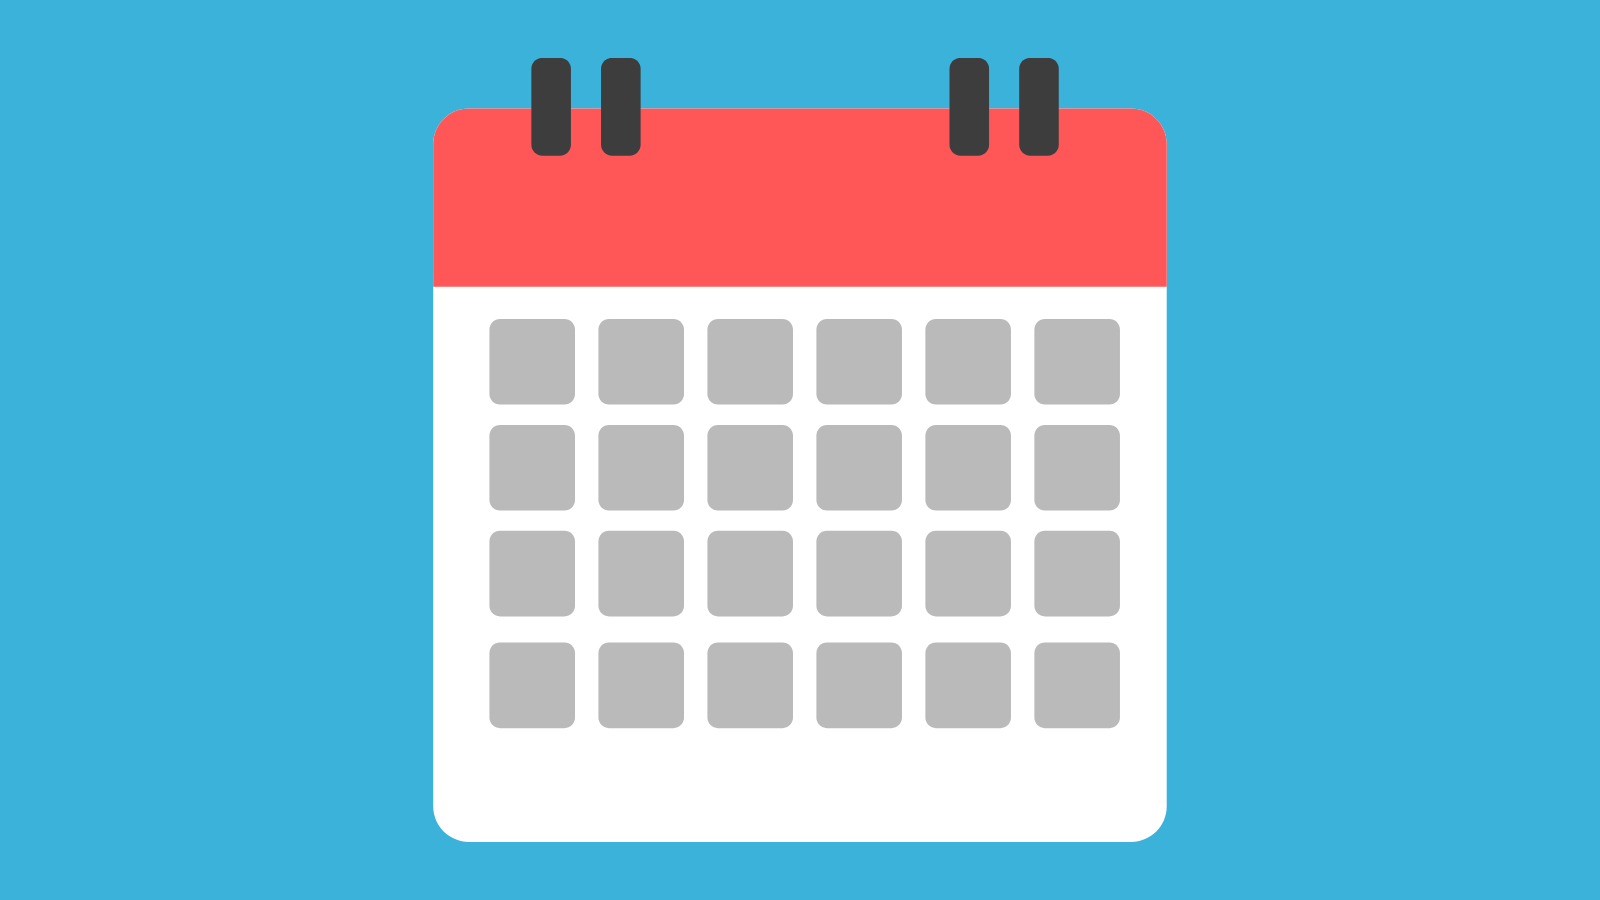 A graphic of a blank calendar